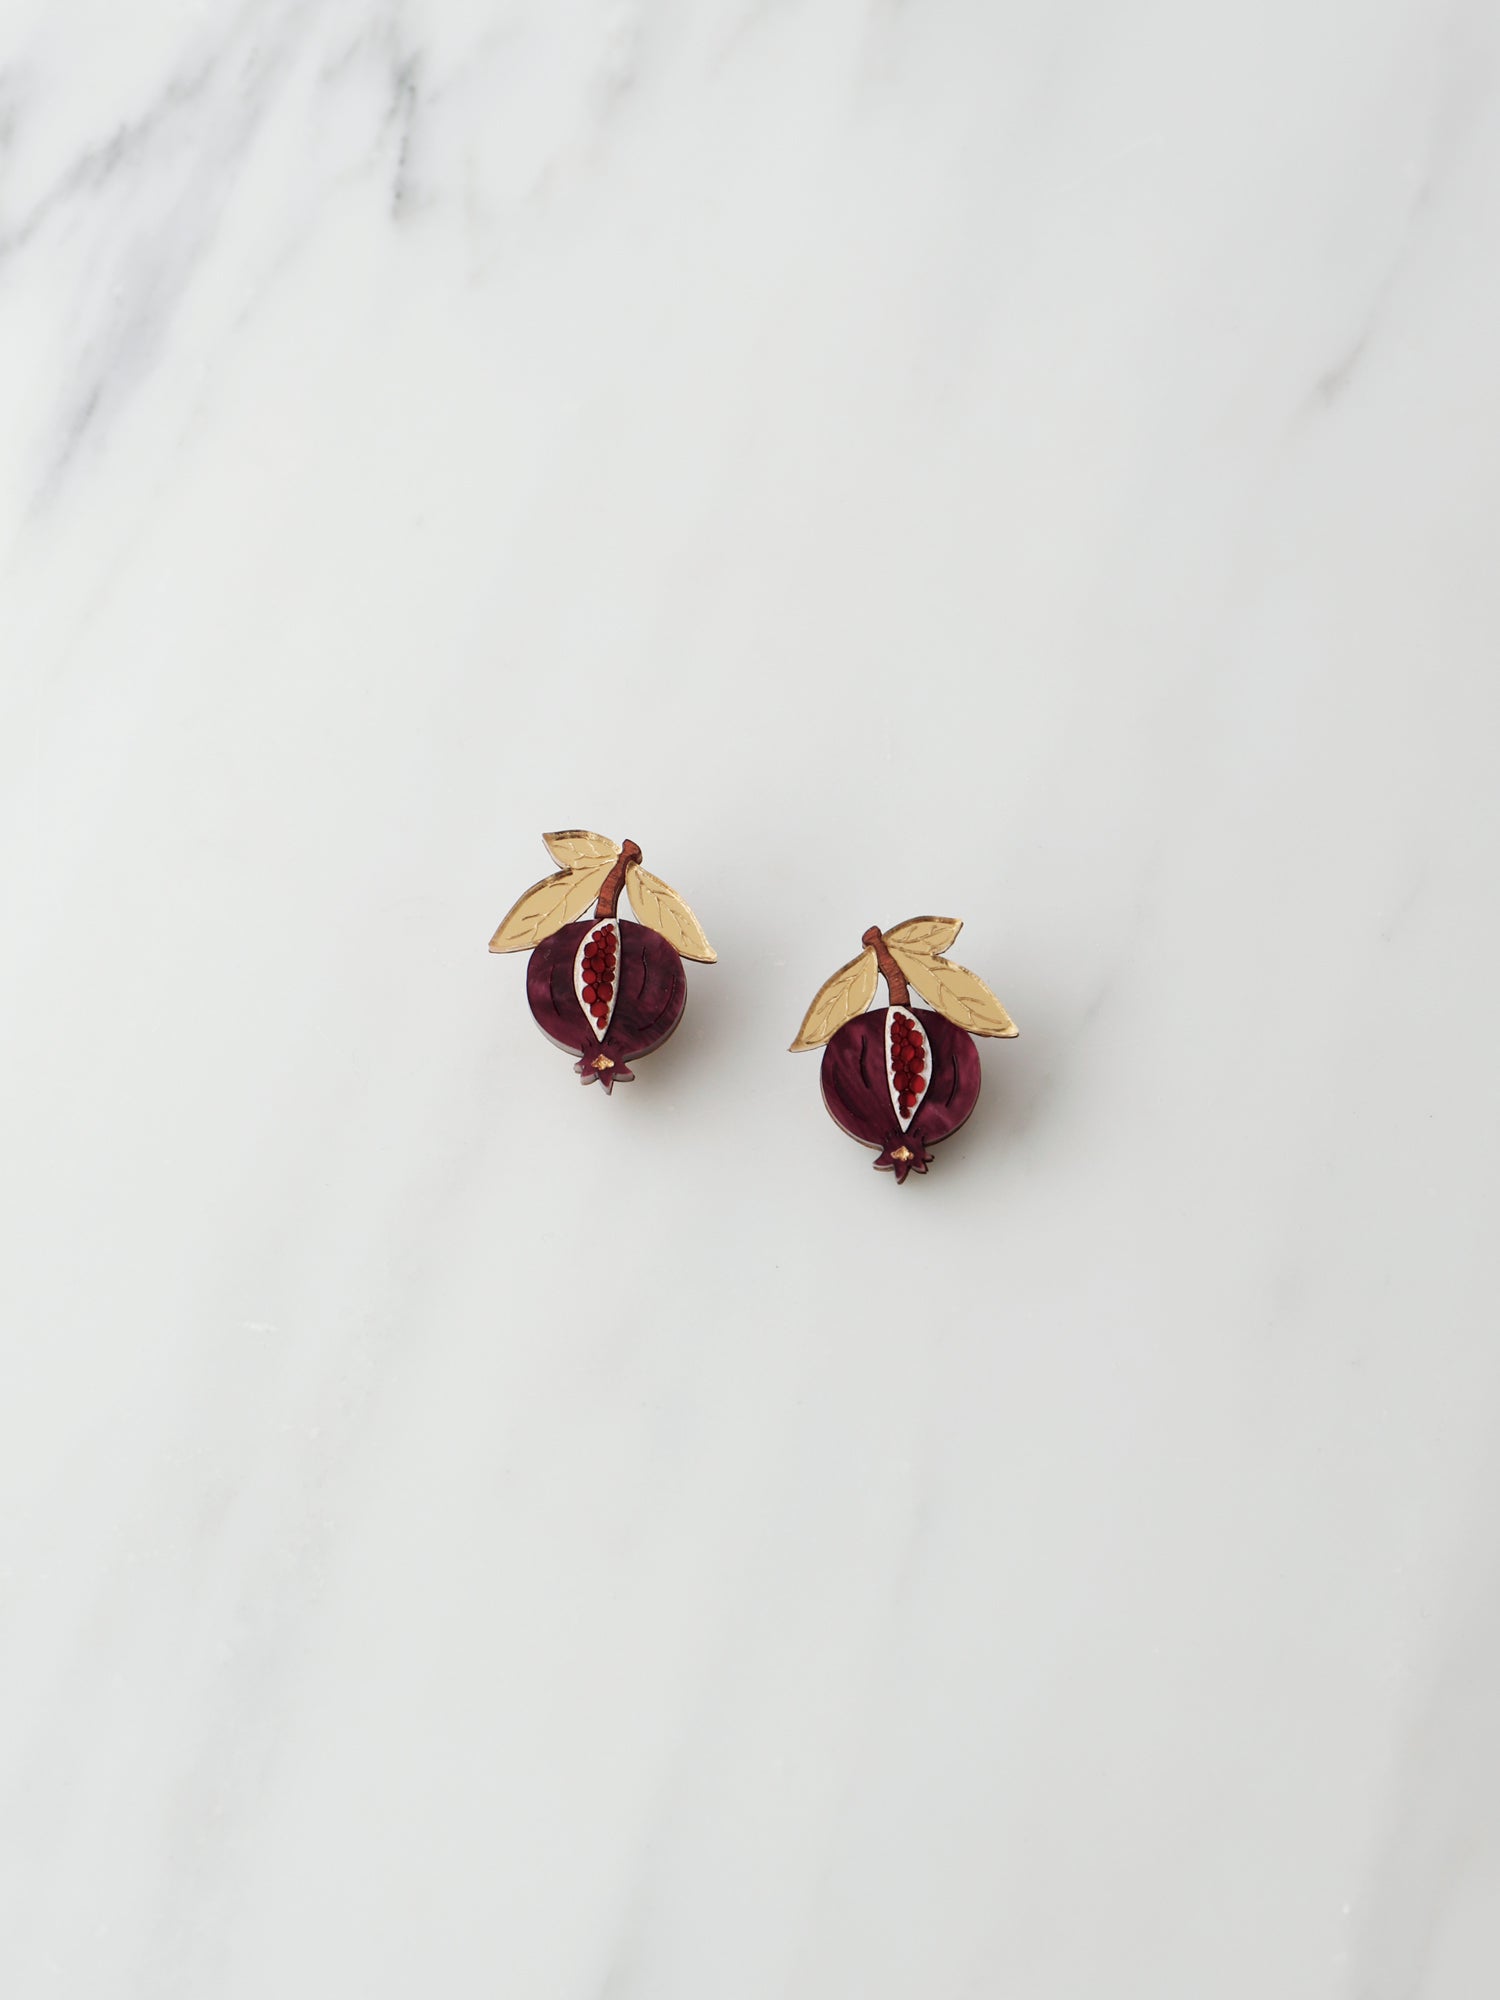 Pomegranate stud earrings made with wood, acrylic and hand-inked details. Handmade in the UK by Wolf & Moon.